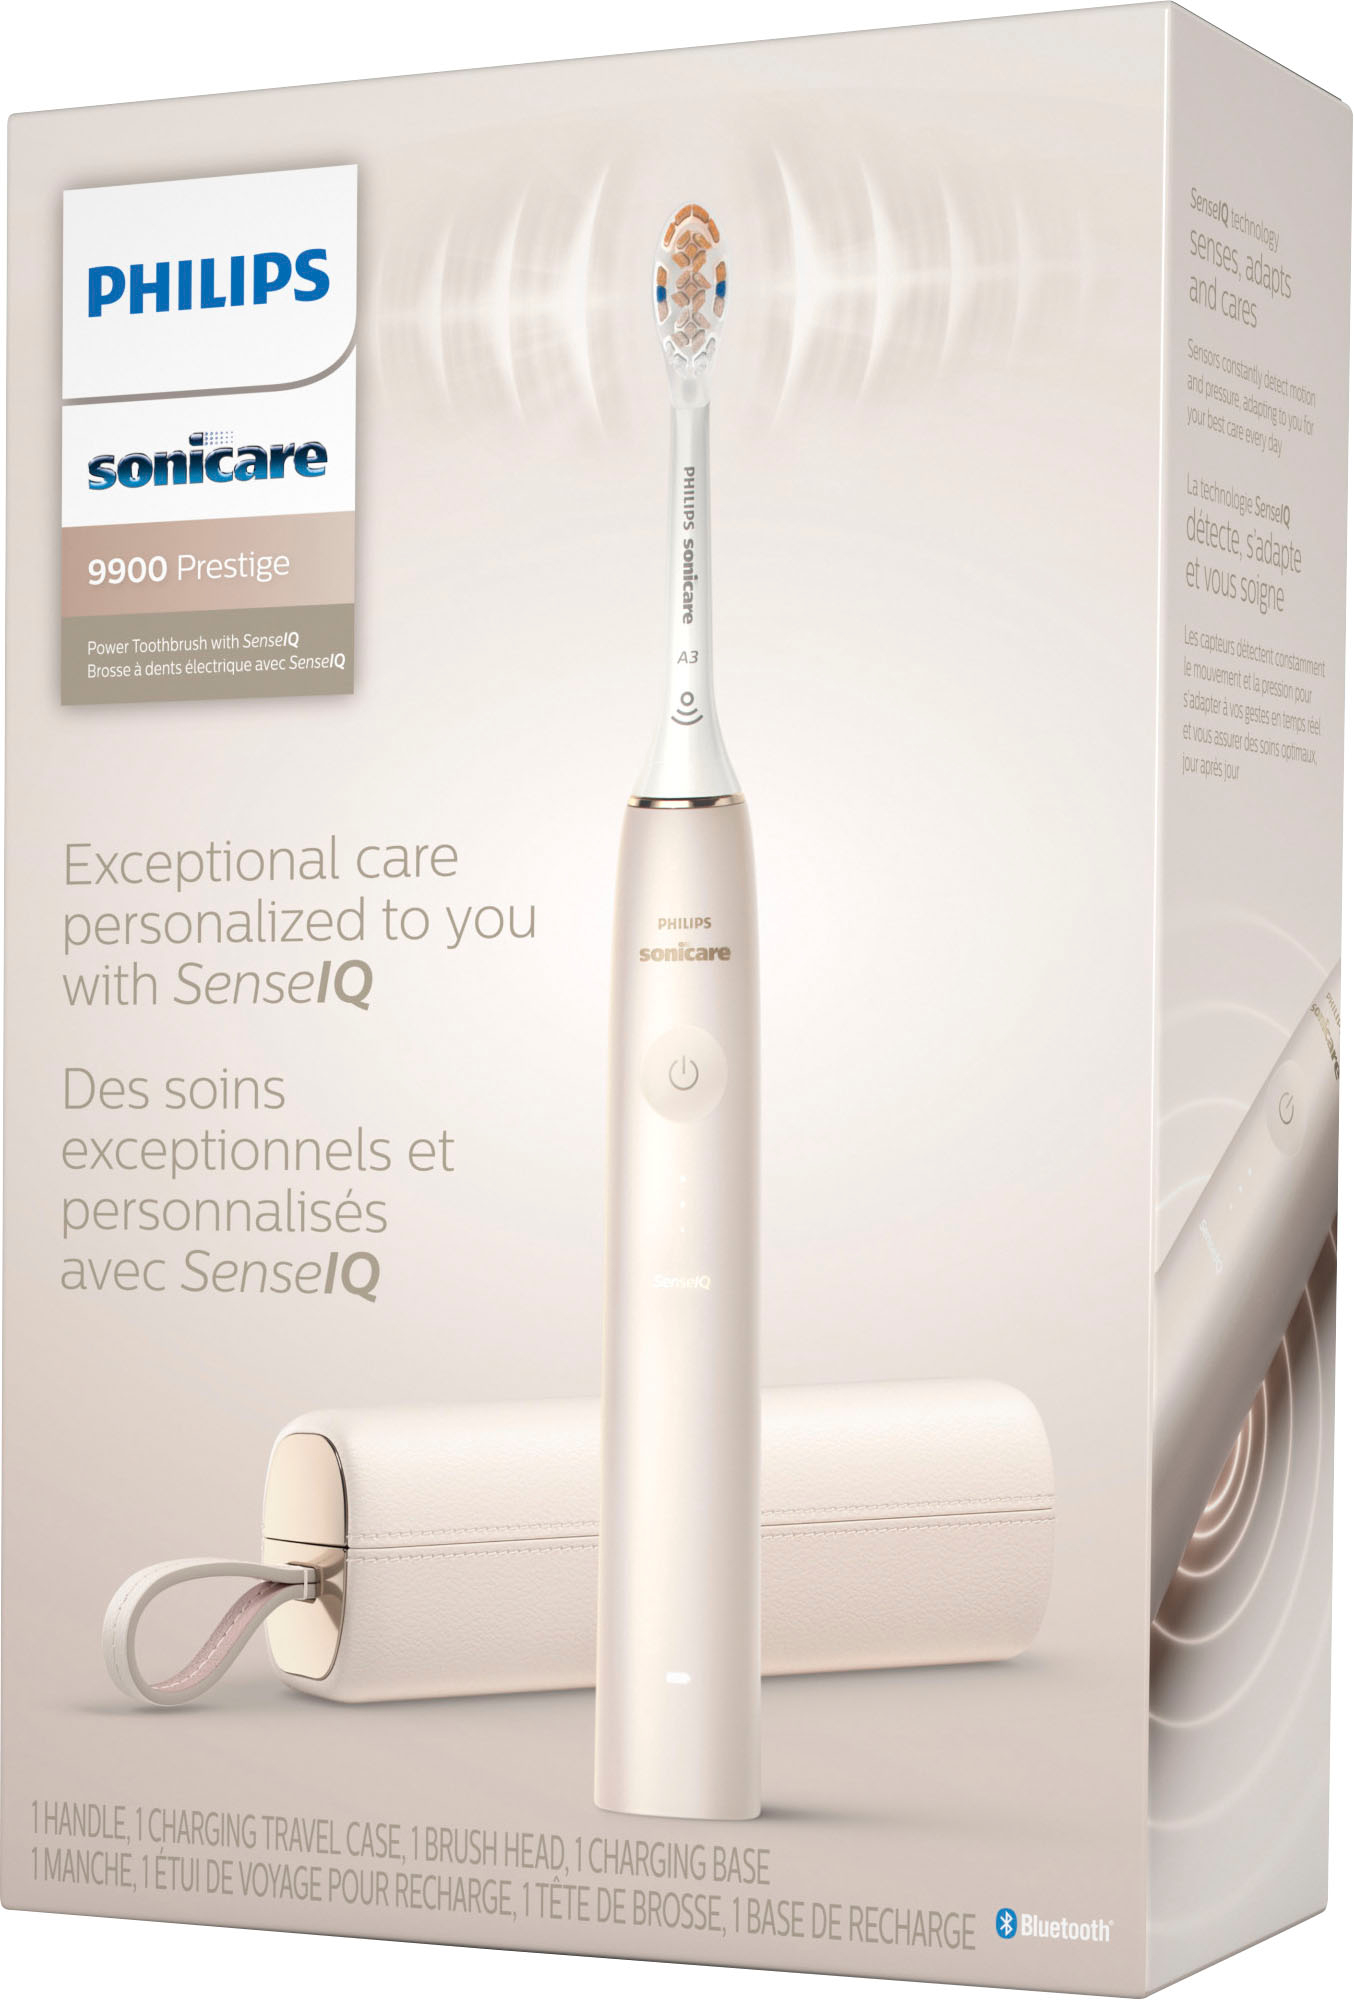 Philips Sonicare 9900 Prestige Rechargeable Electric Toothbrush with  SenseIQ Champagne HX9990/11 - Best Buy